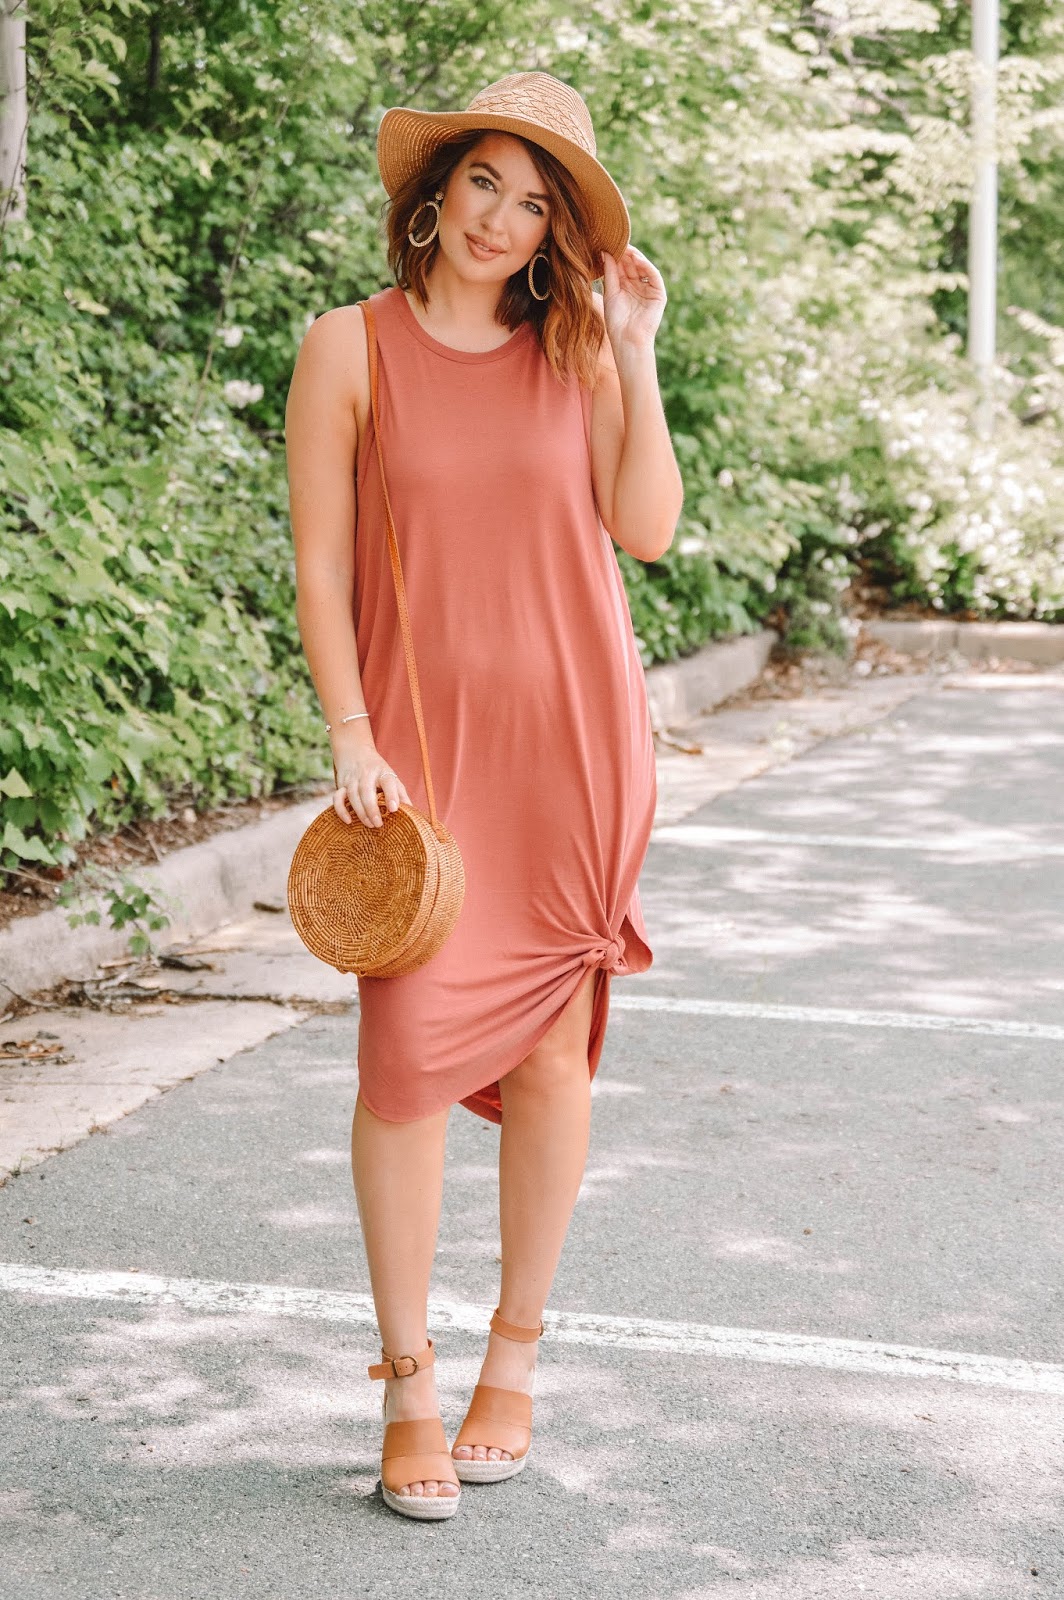 Rosy Outlook: My FAVORITE Casual Dress + FF Link-Up!